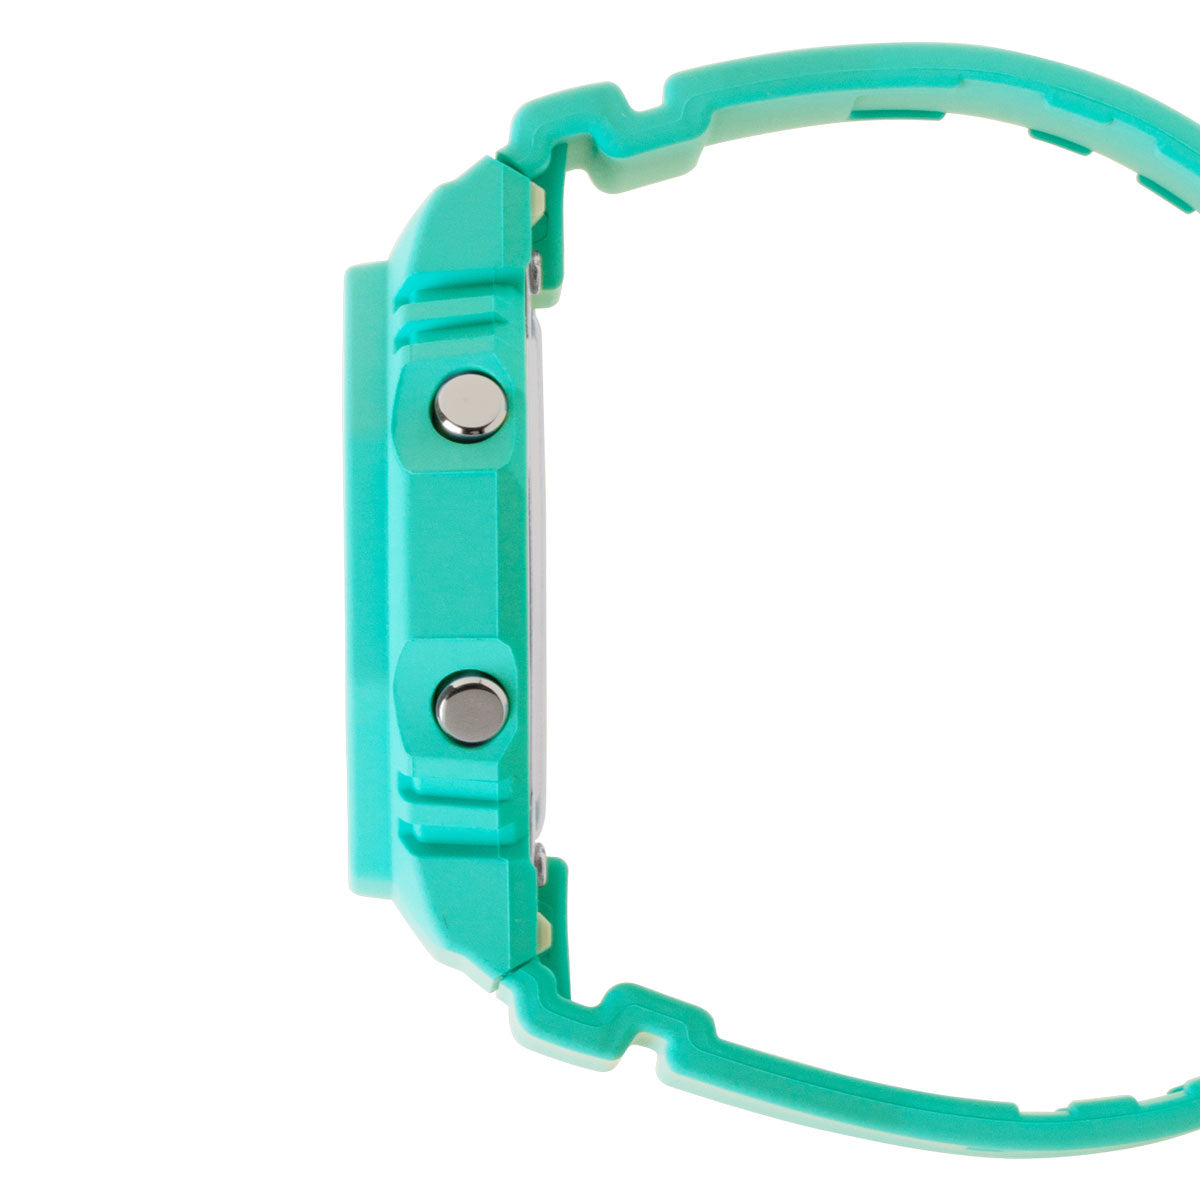 G-Shock GMAP2100-2A Watch - Teal image 4